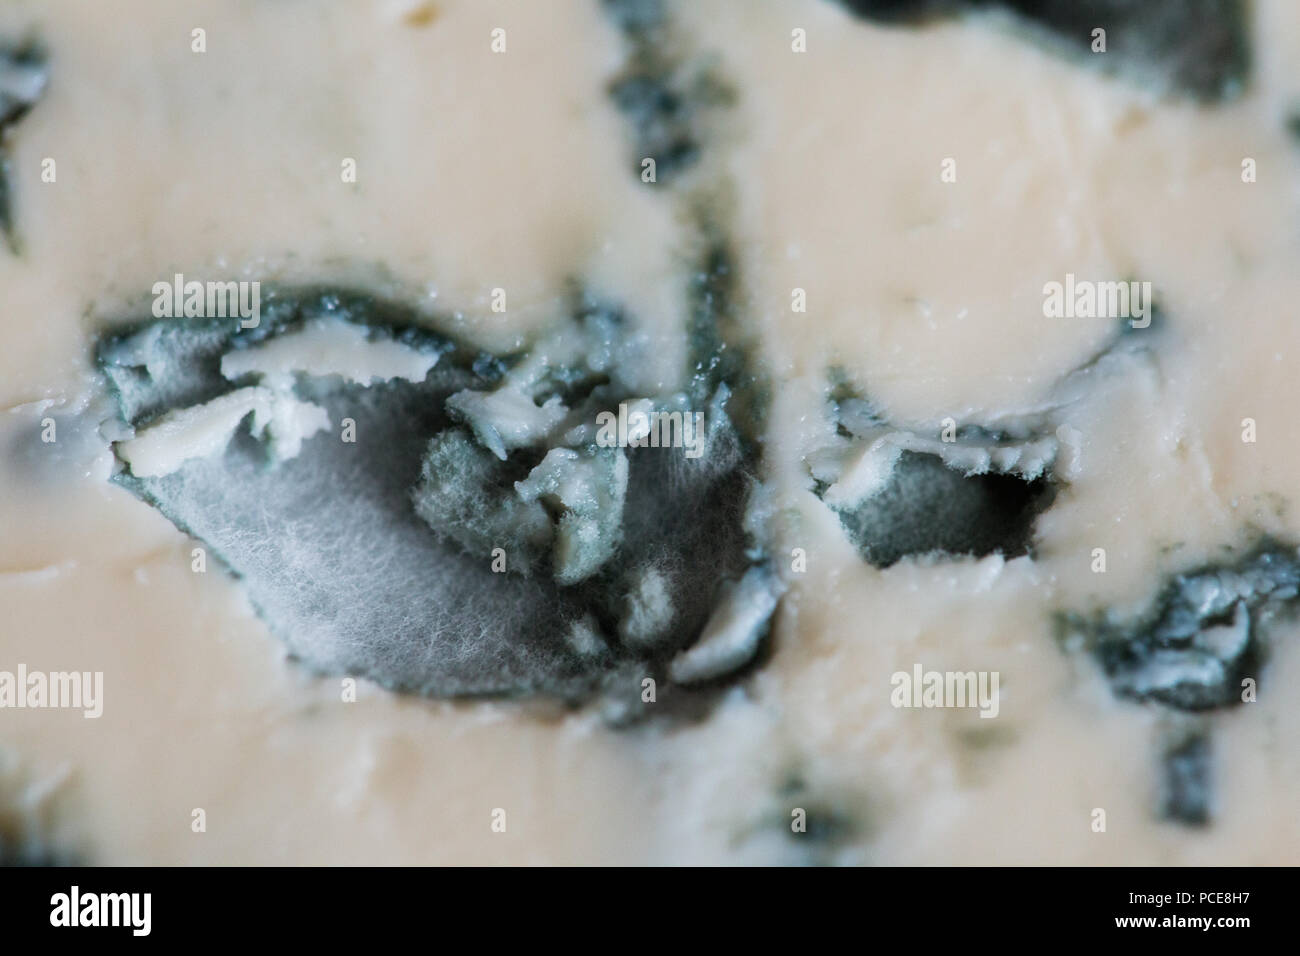 Close-up view of French froume d'Ambert blue cheese Stock Photo